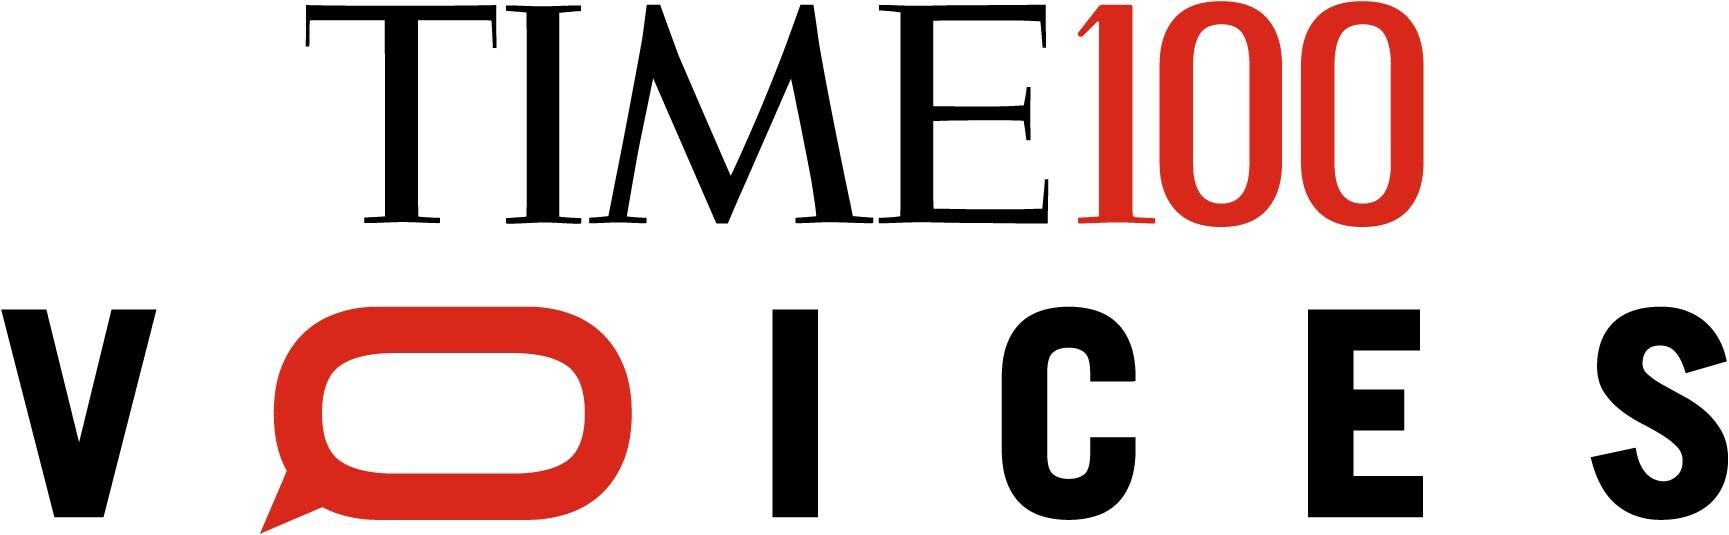 TIME unveils TIME100 Voices, a new editorial platform dedicated to spotlighting the ideas and perspectives of global leaders from the TIME100 community of the world’s most influential people.